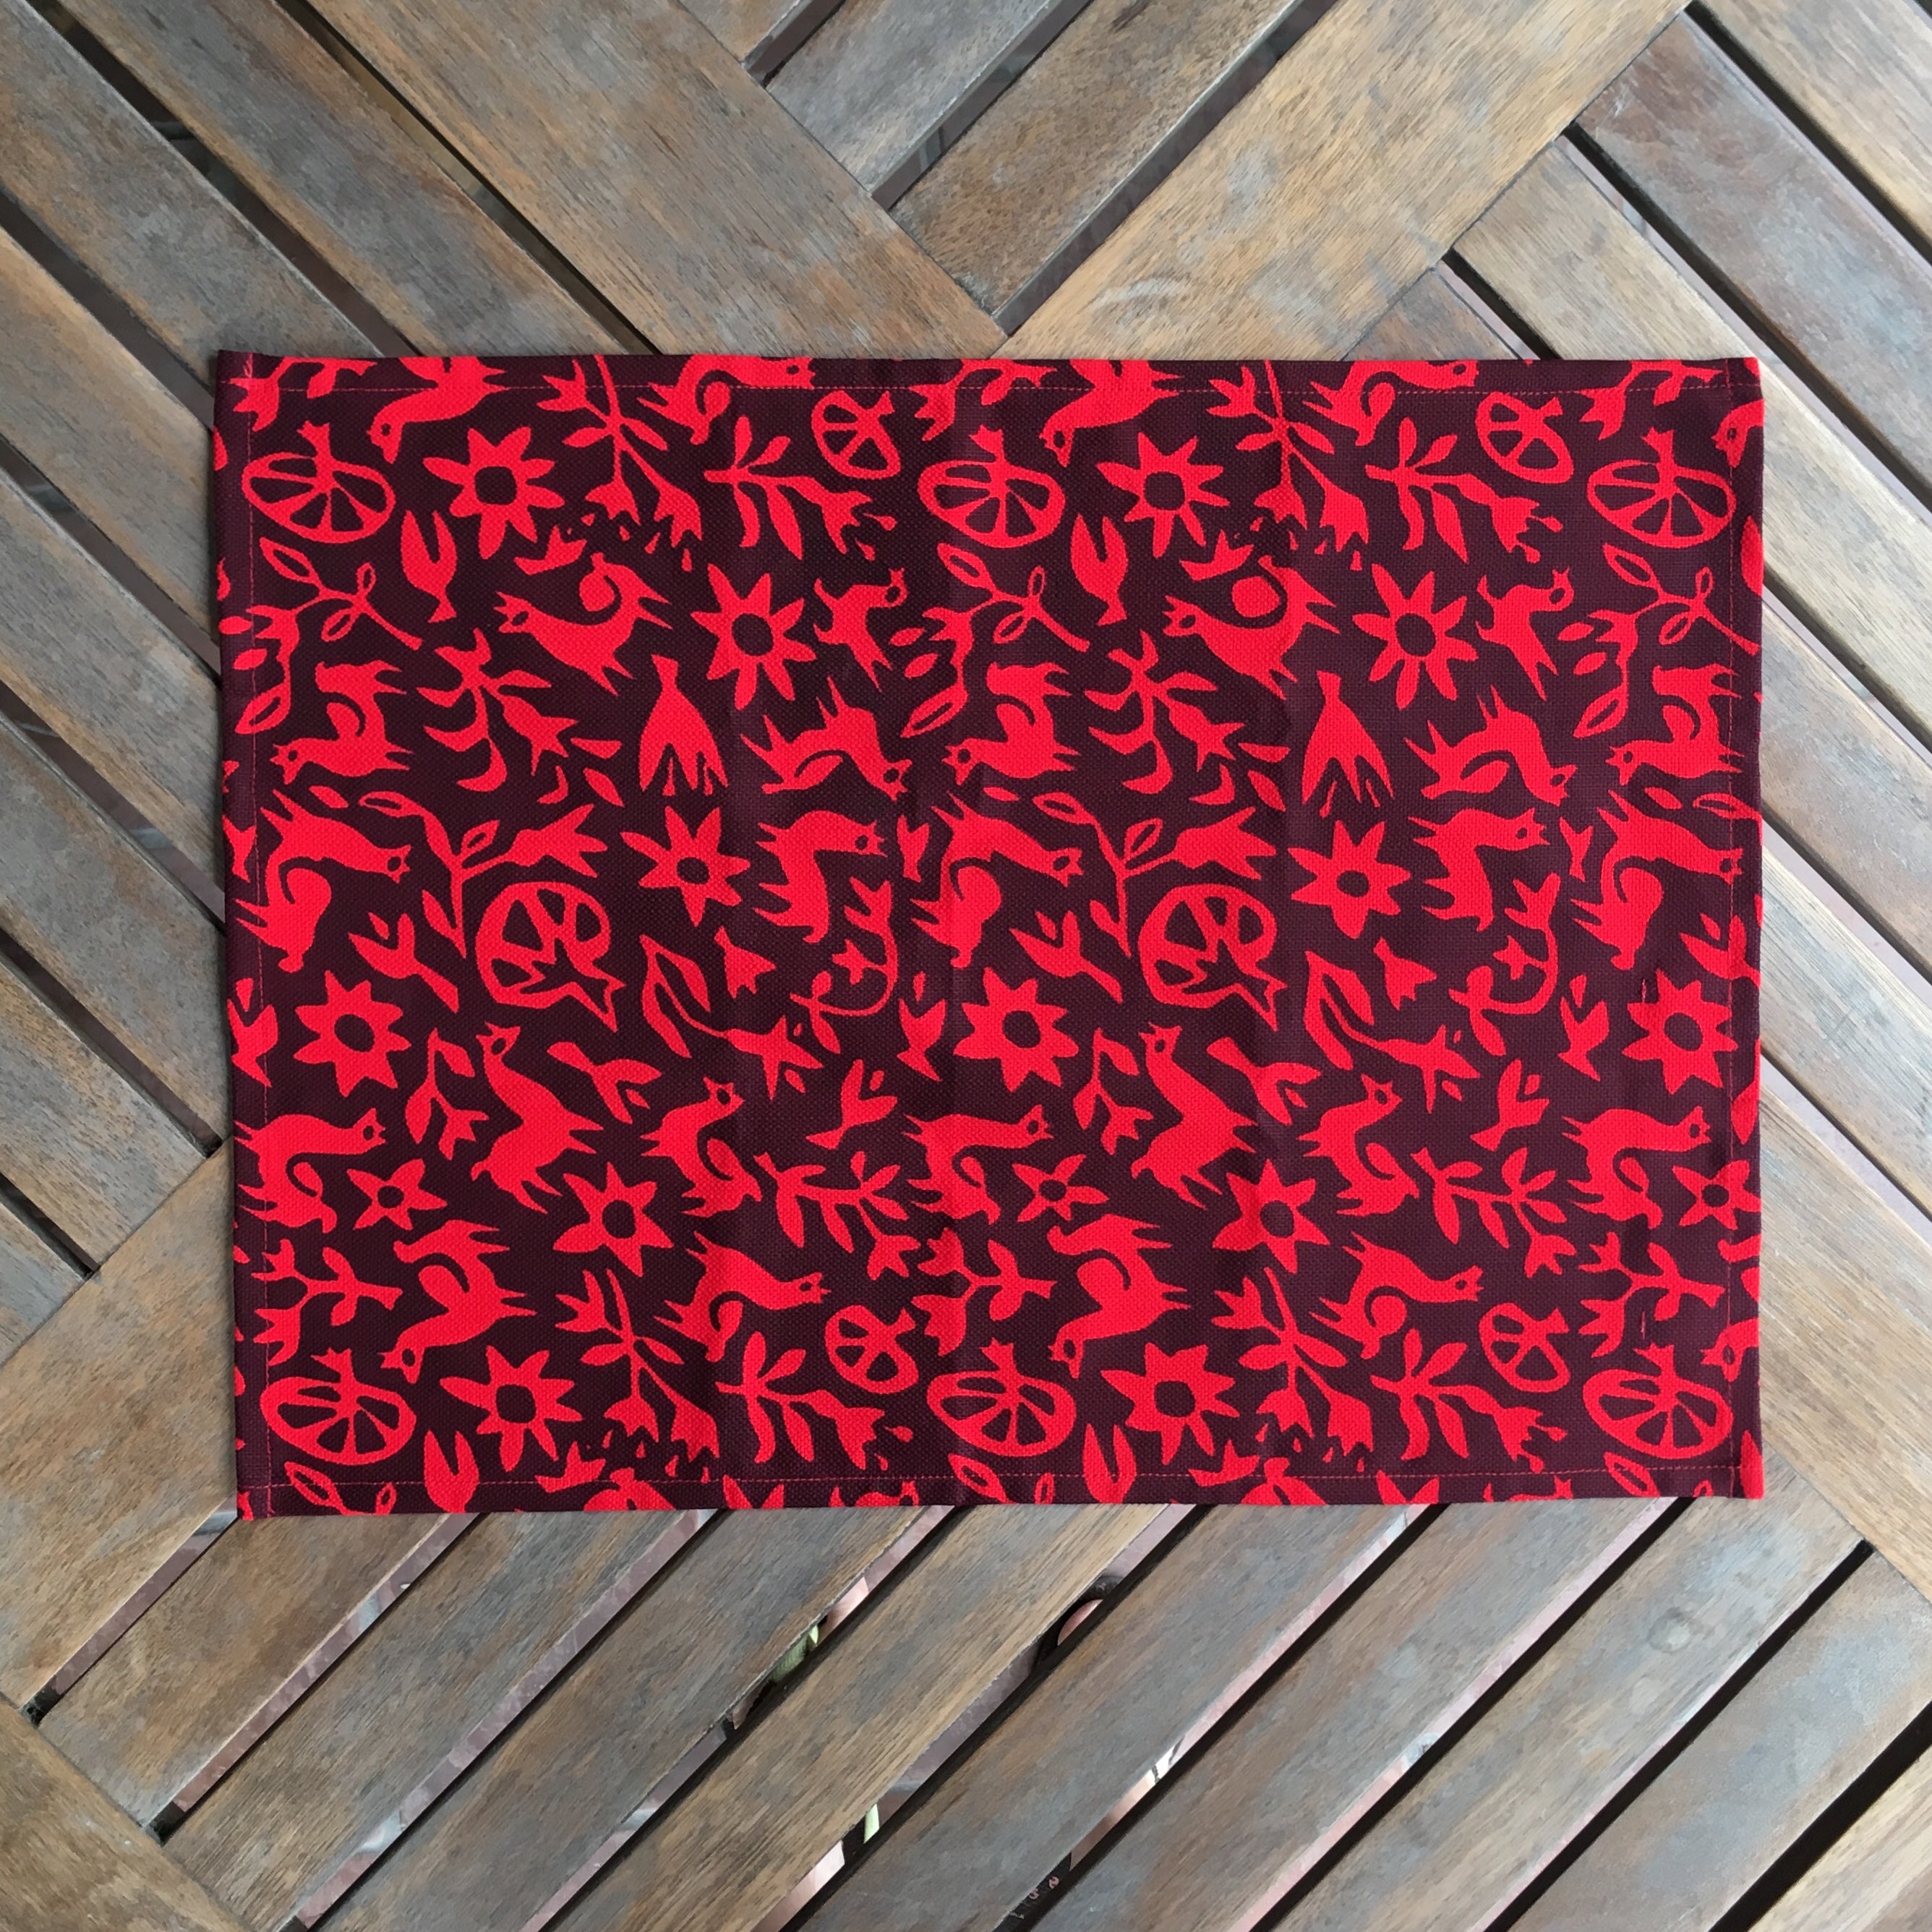 Set of Four Placemats - Pasto Print Red